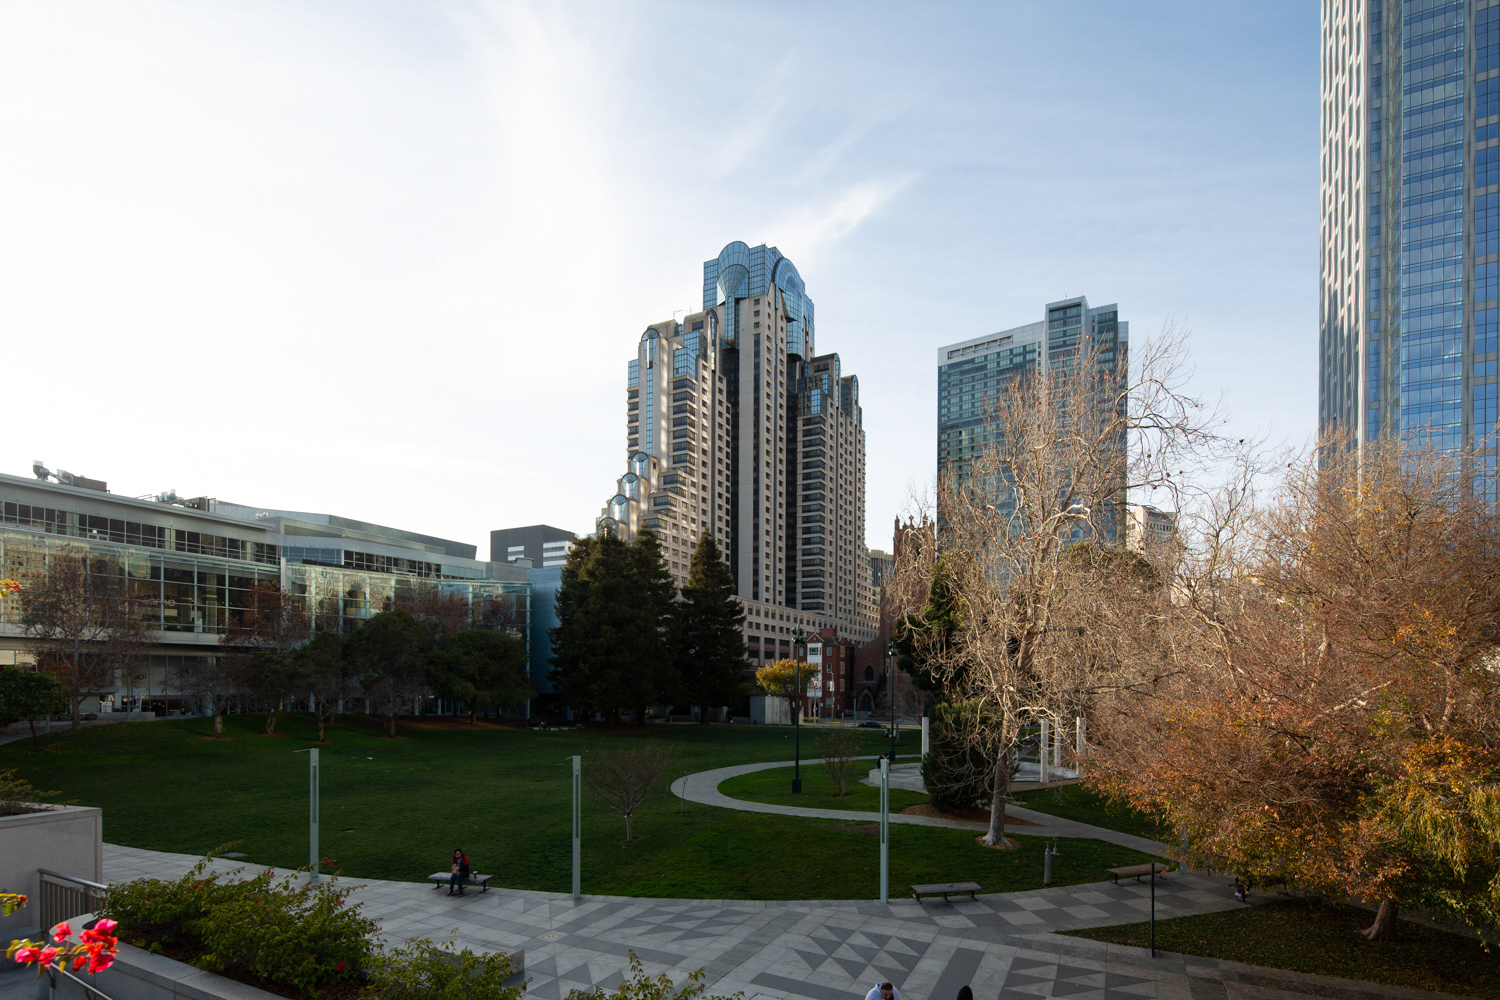 55 Fourth Street from across the Yerba Buena Gardens, image by Andrew Campbell Nelson